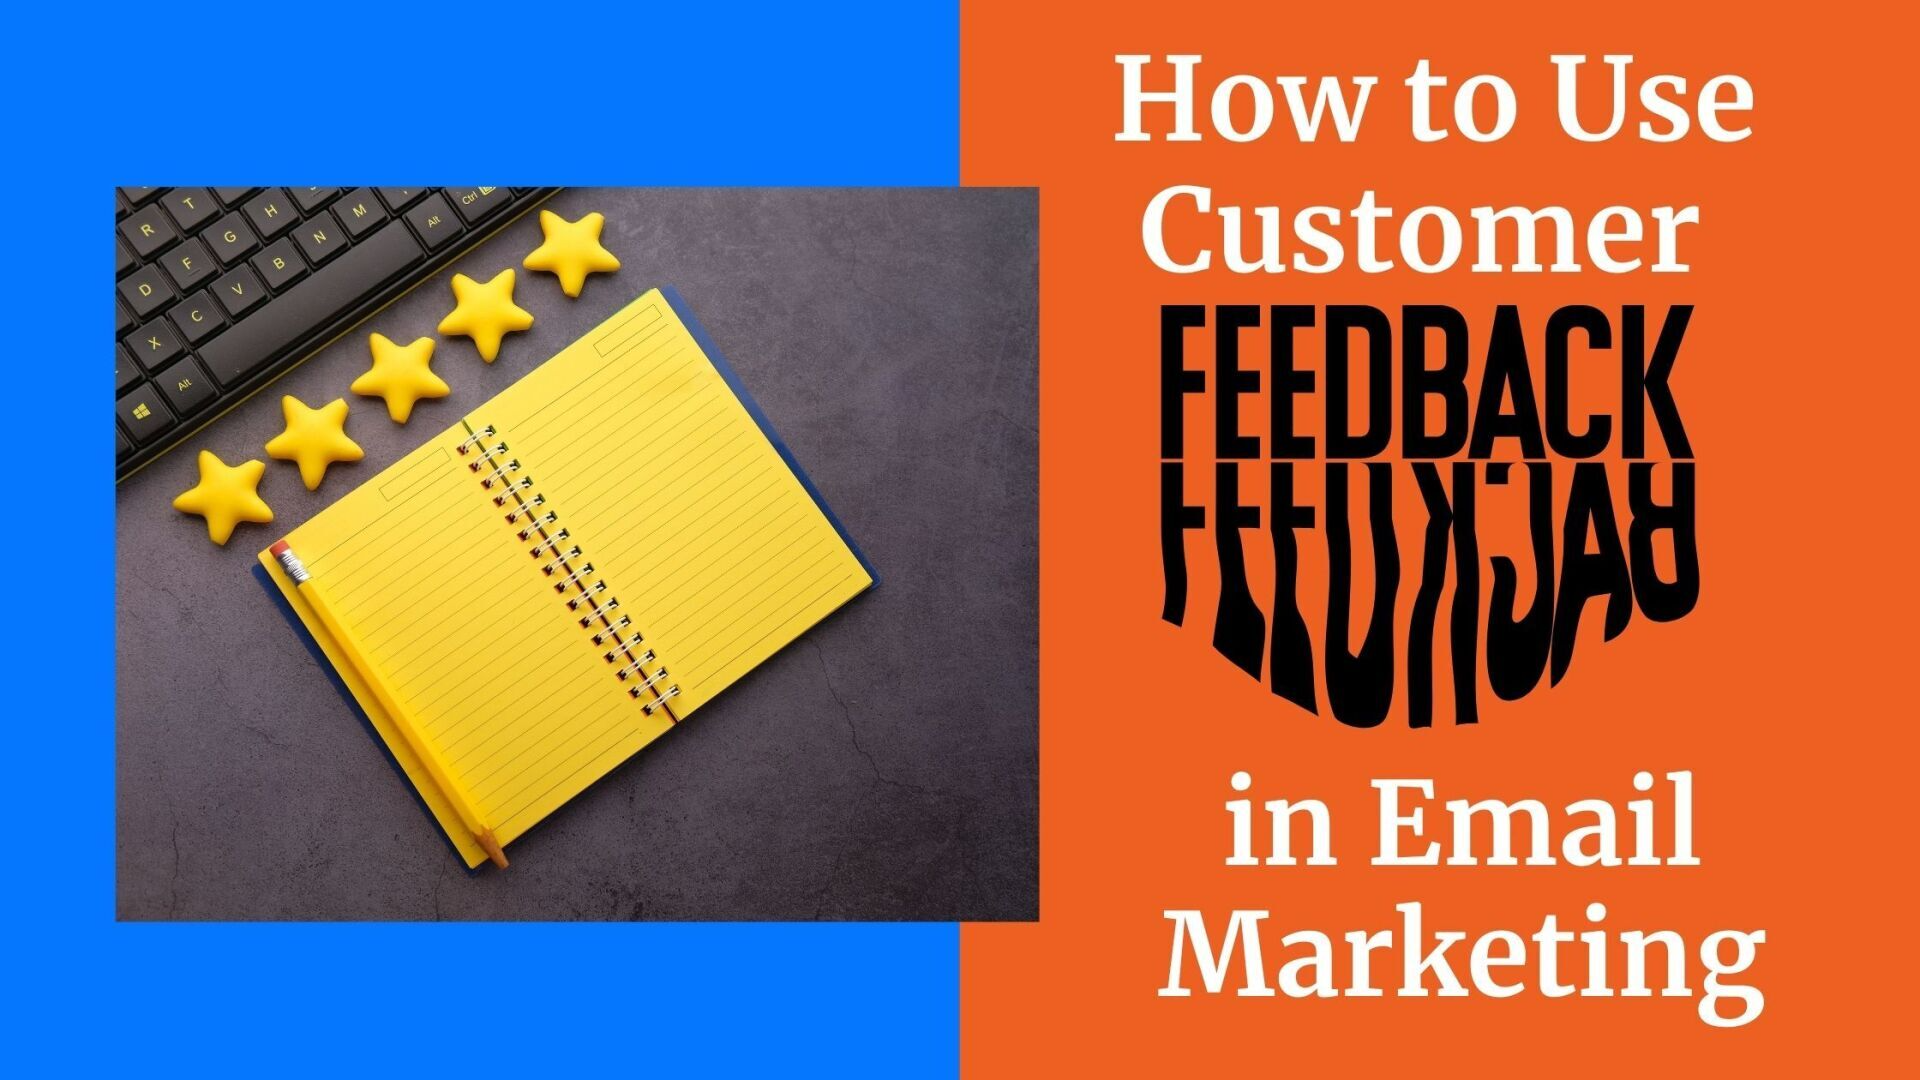 How to use customer feedback in emails top image